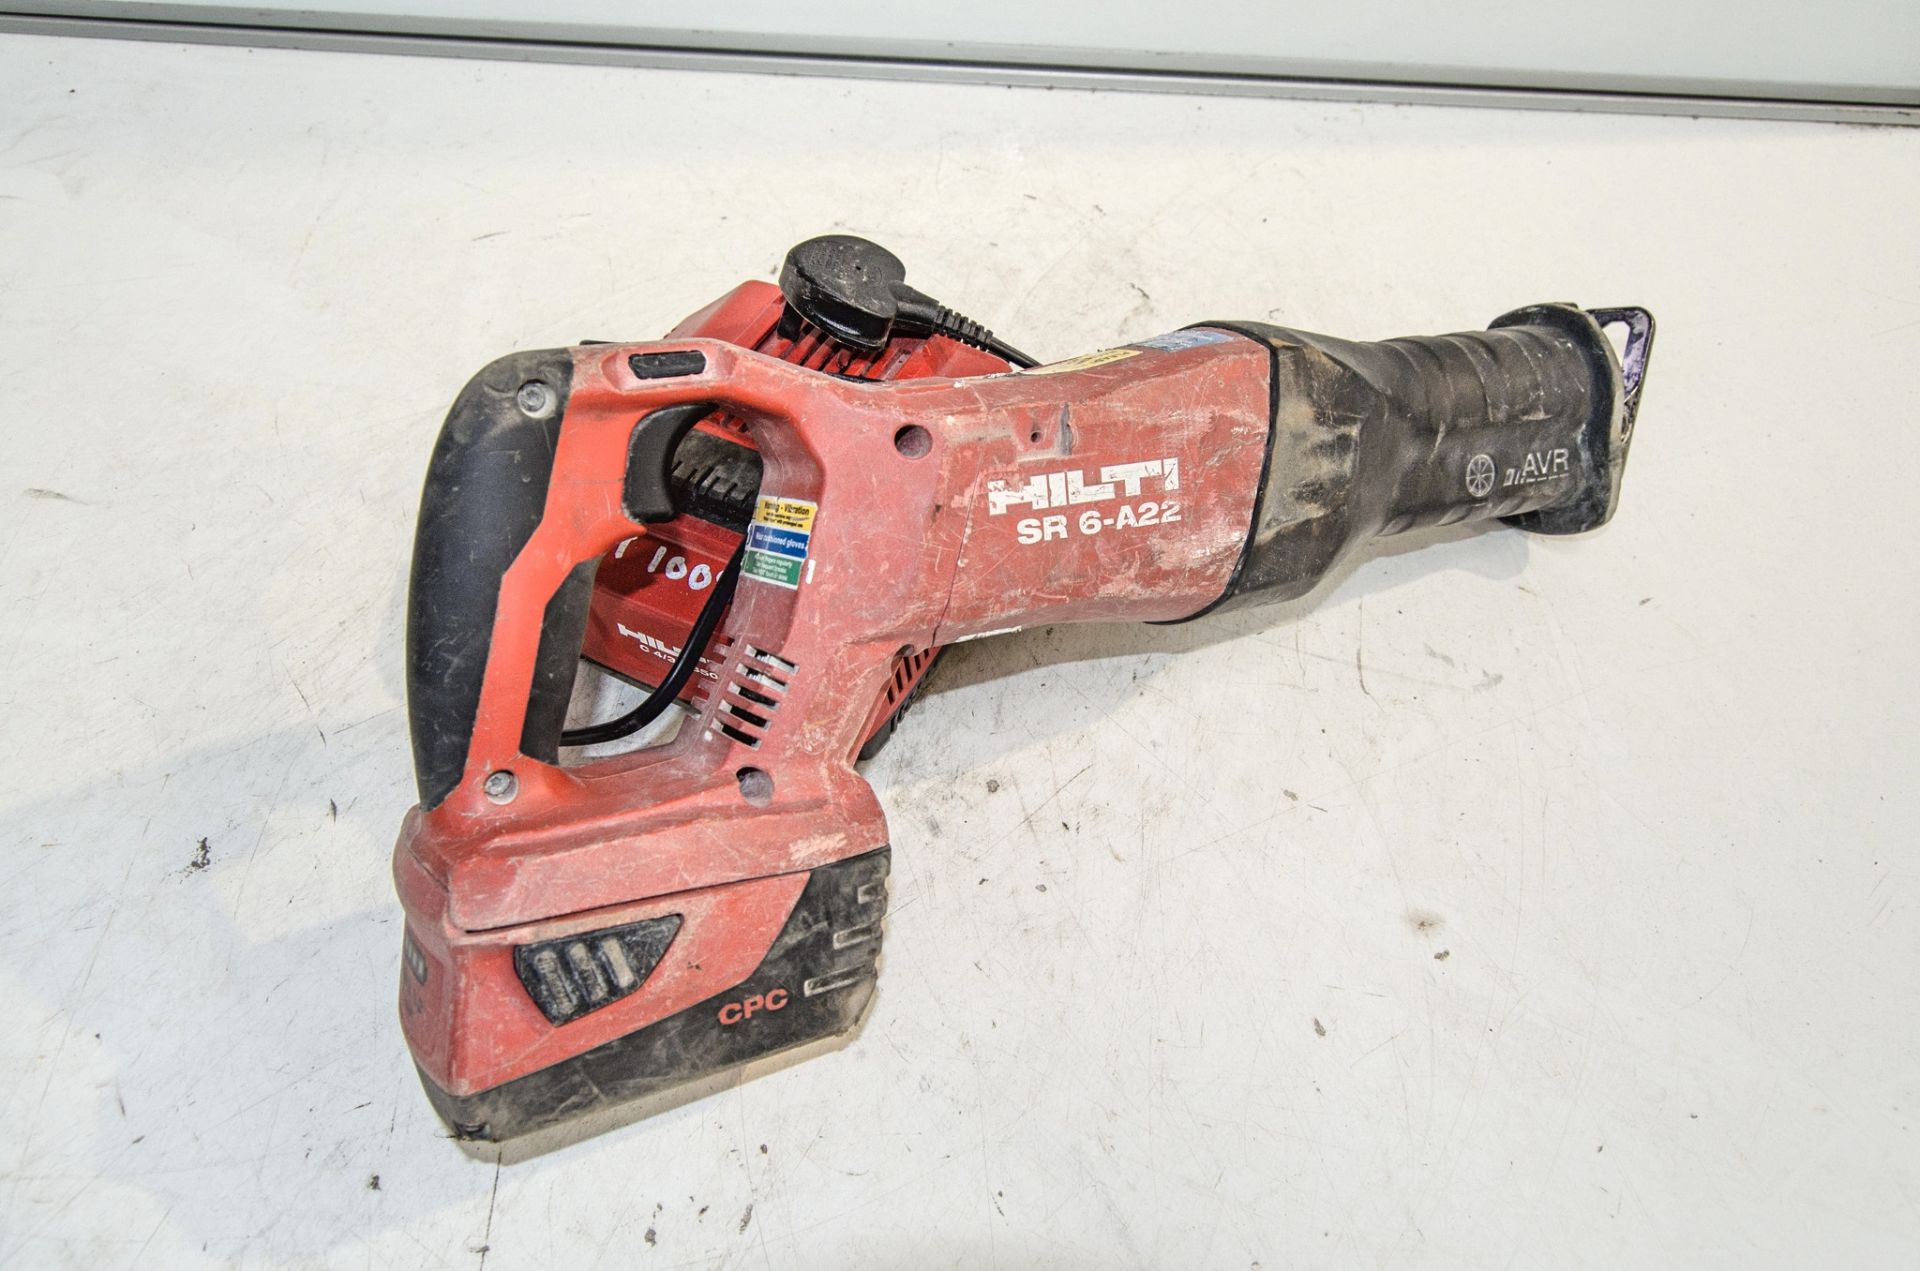 Hilti SR6-A22 22v cordless reciprocating saw c/w battery and charger EXP3671 - Image 2 of 2